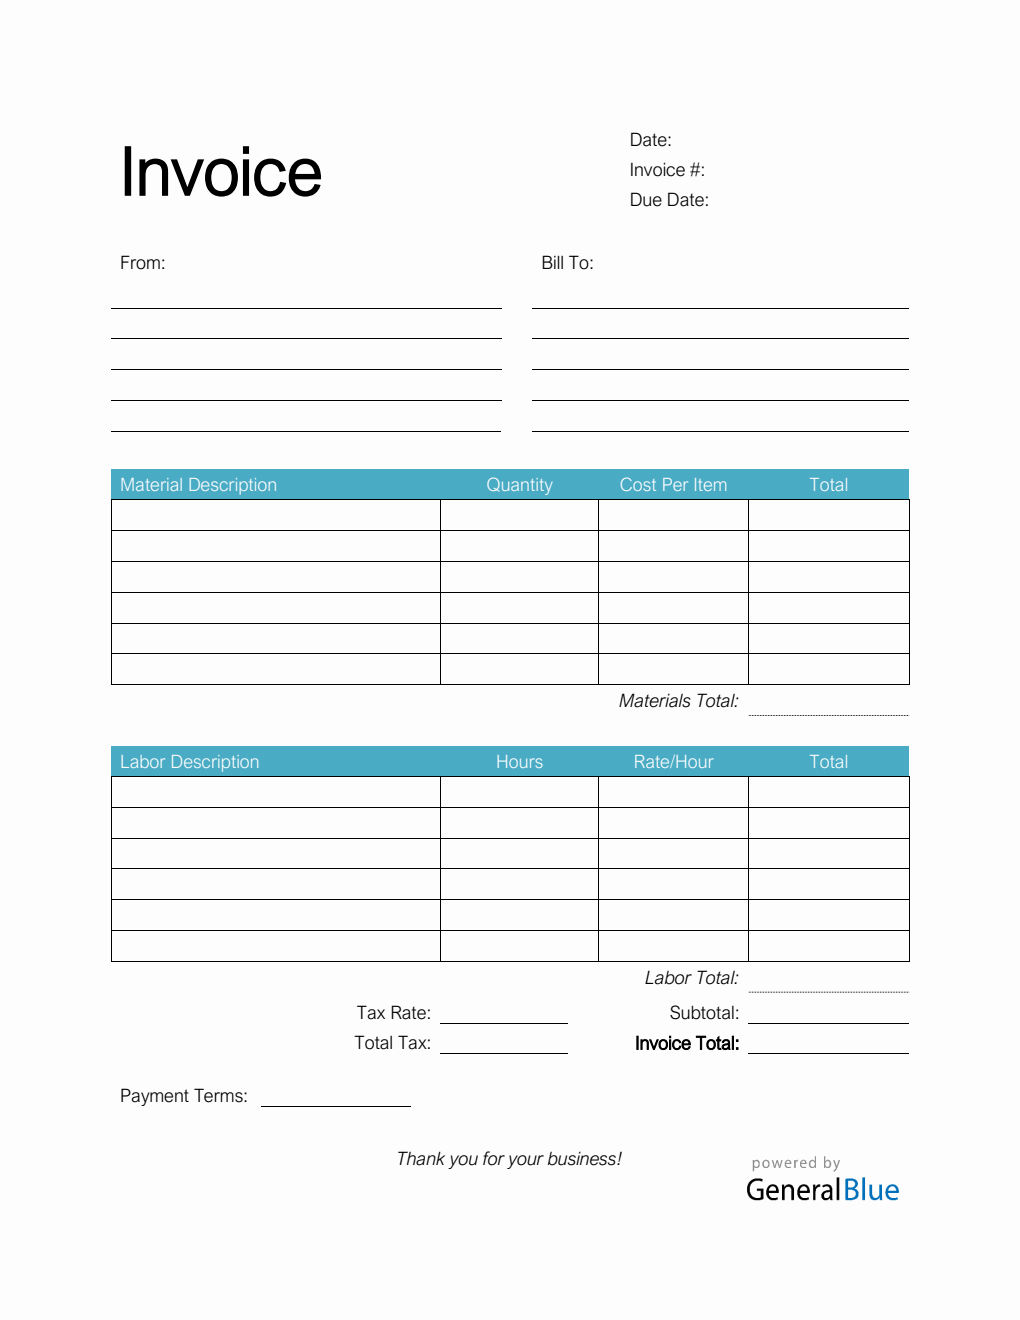 Time and Materials Invoice with Tax Calculation in PDF (Basic)